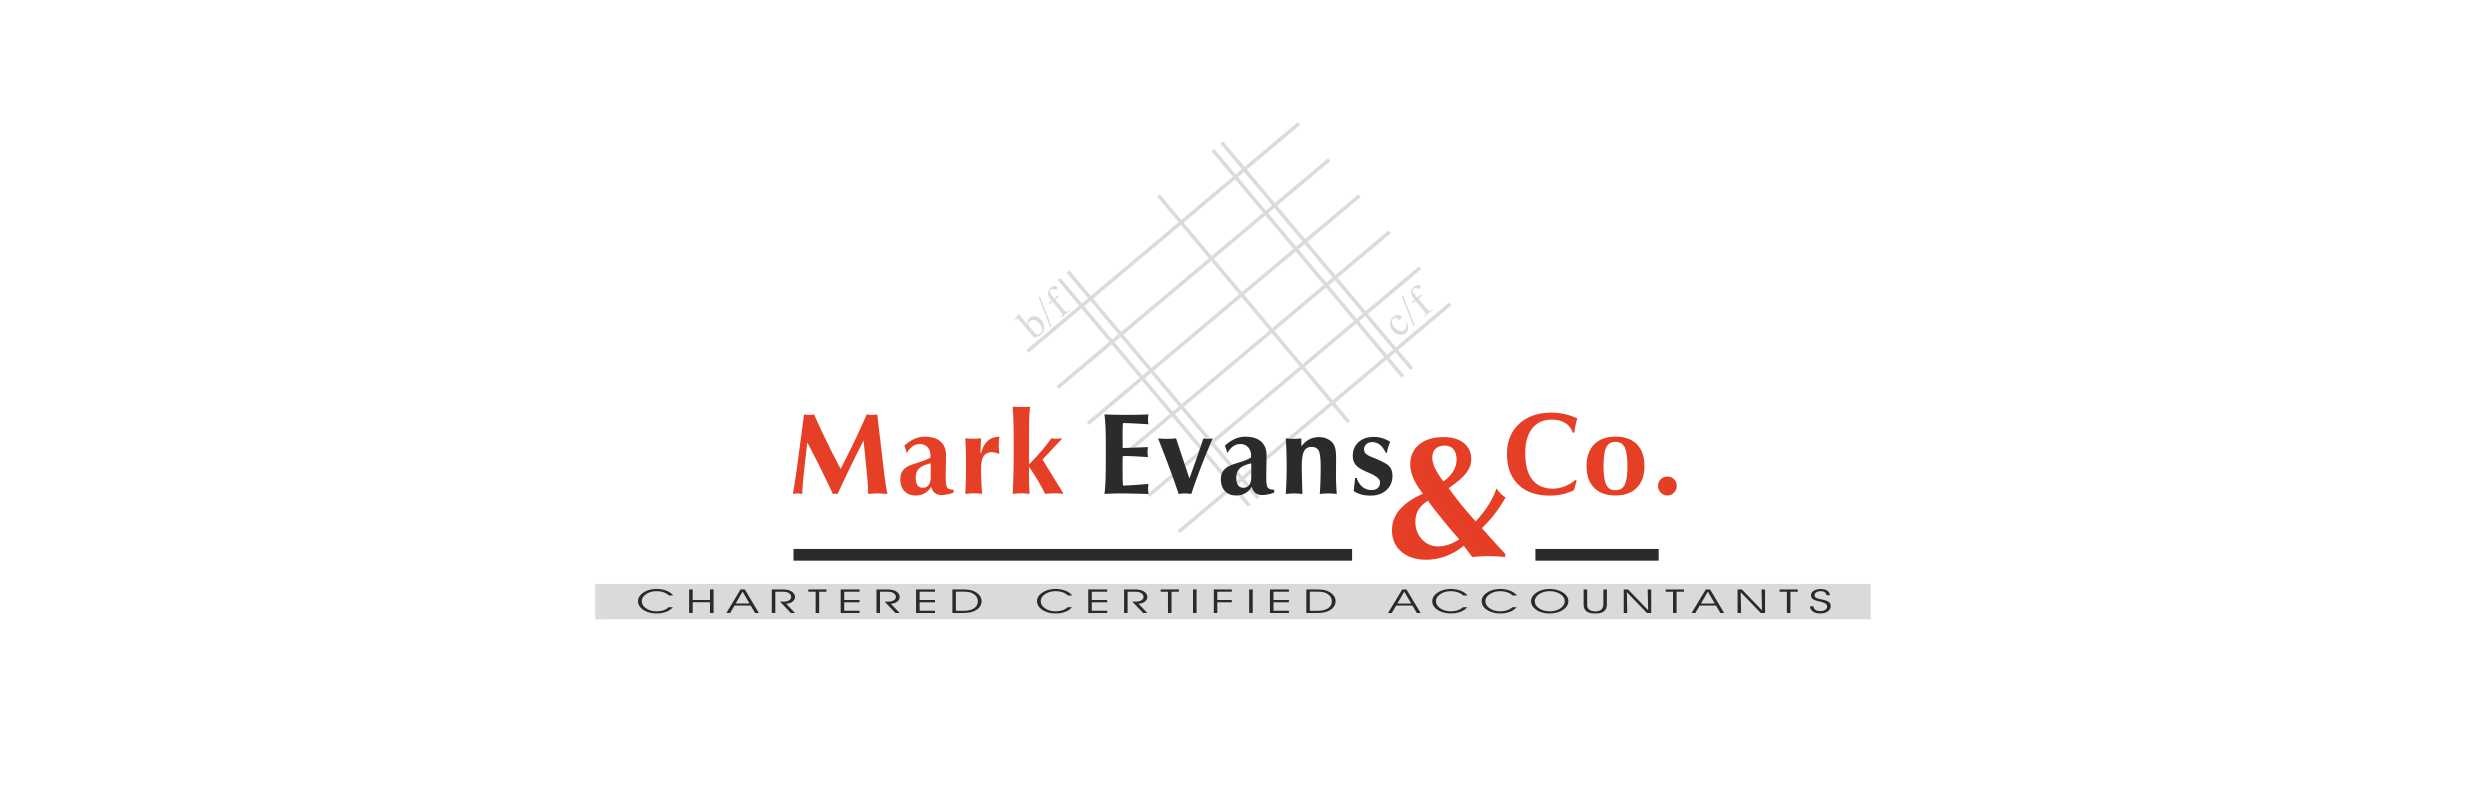 evans and co logo